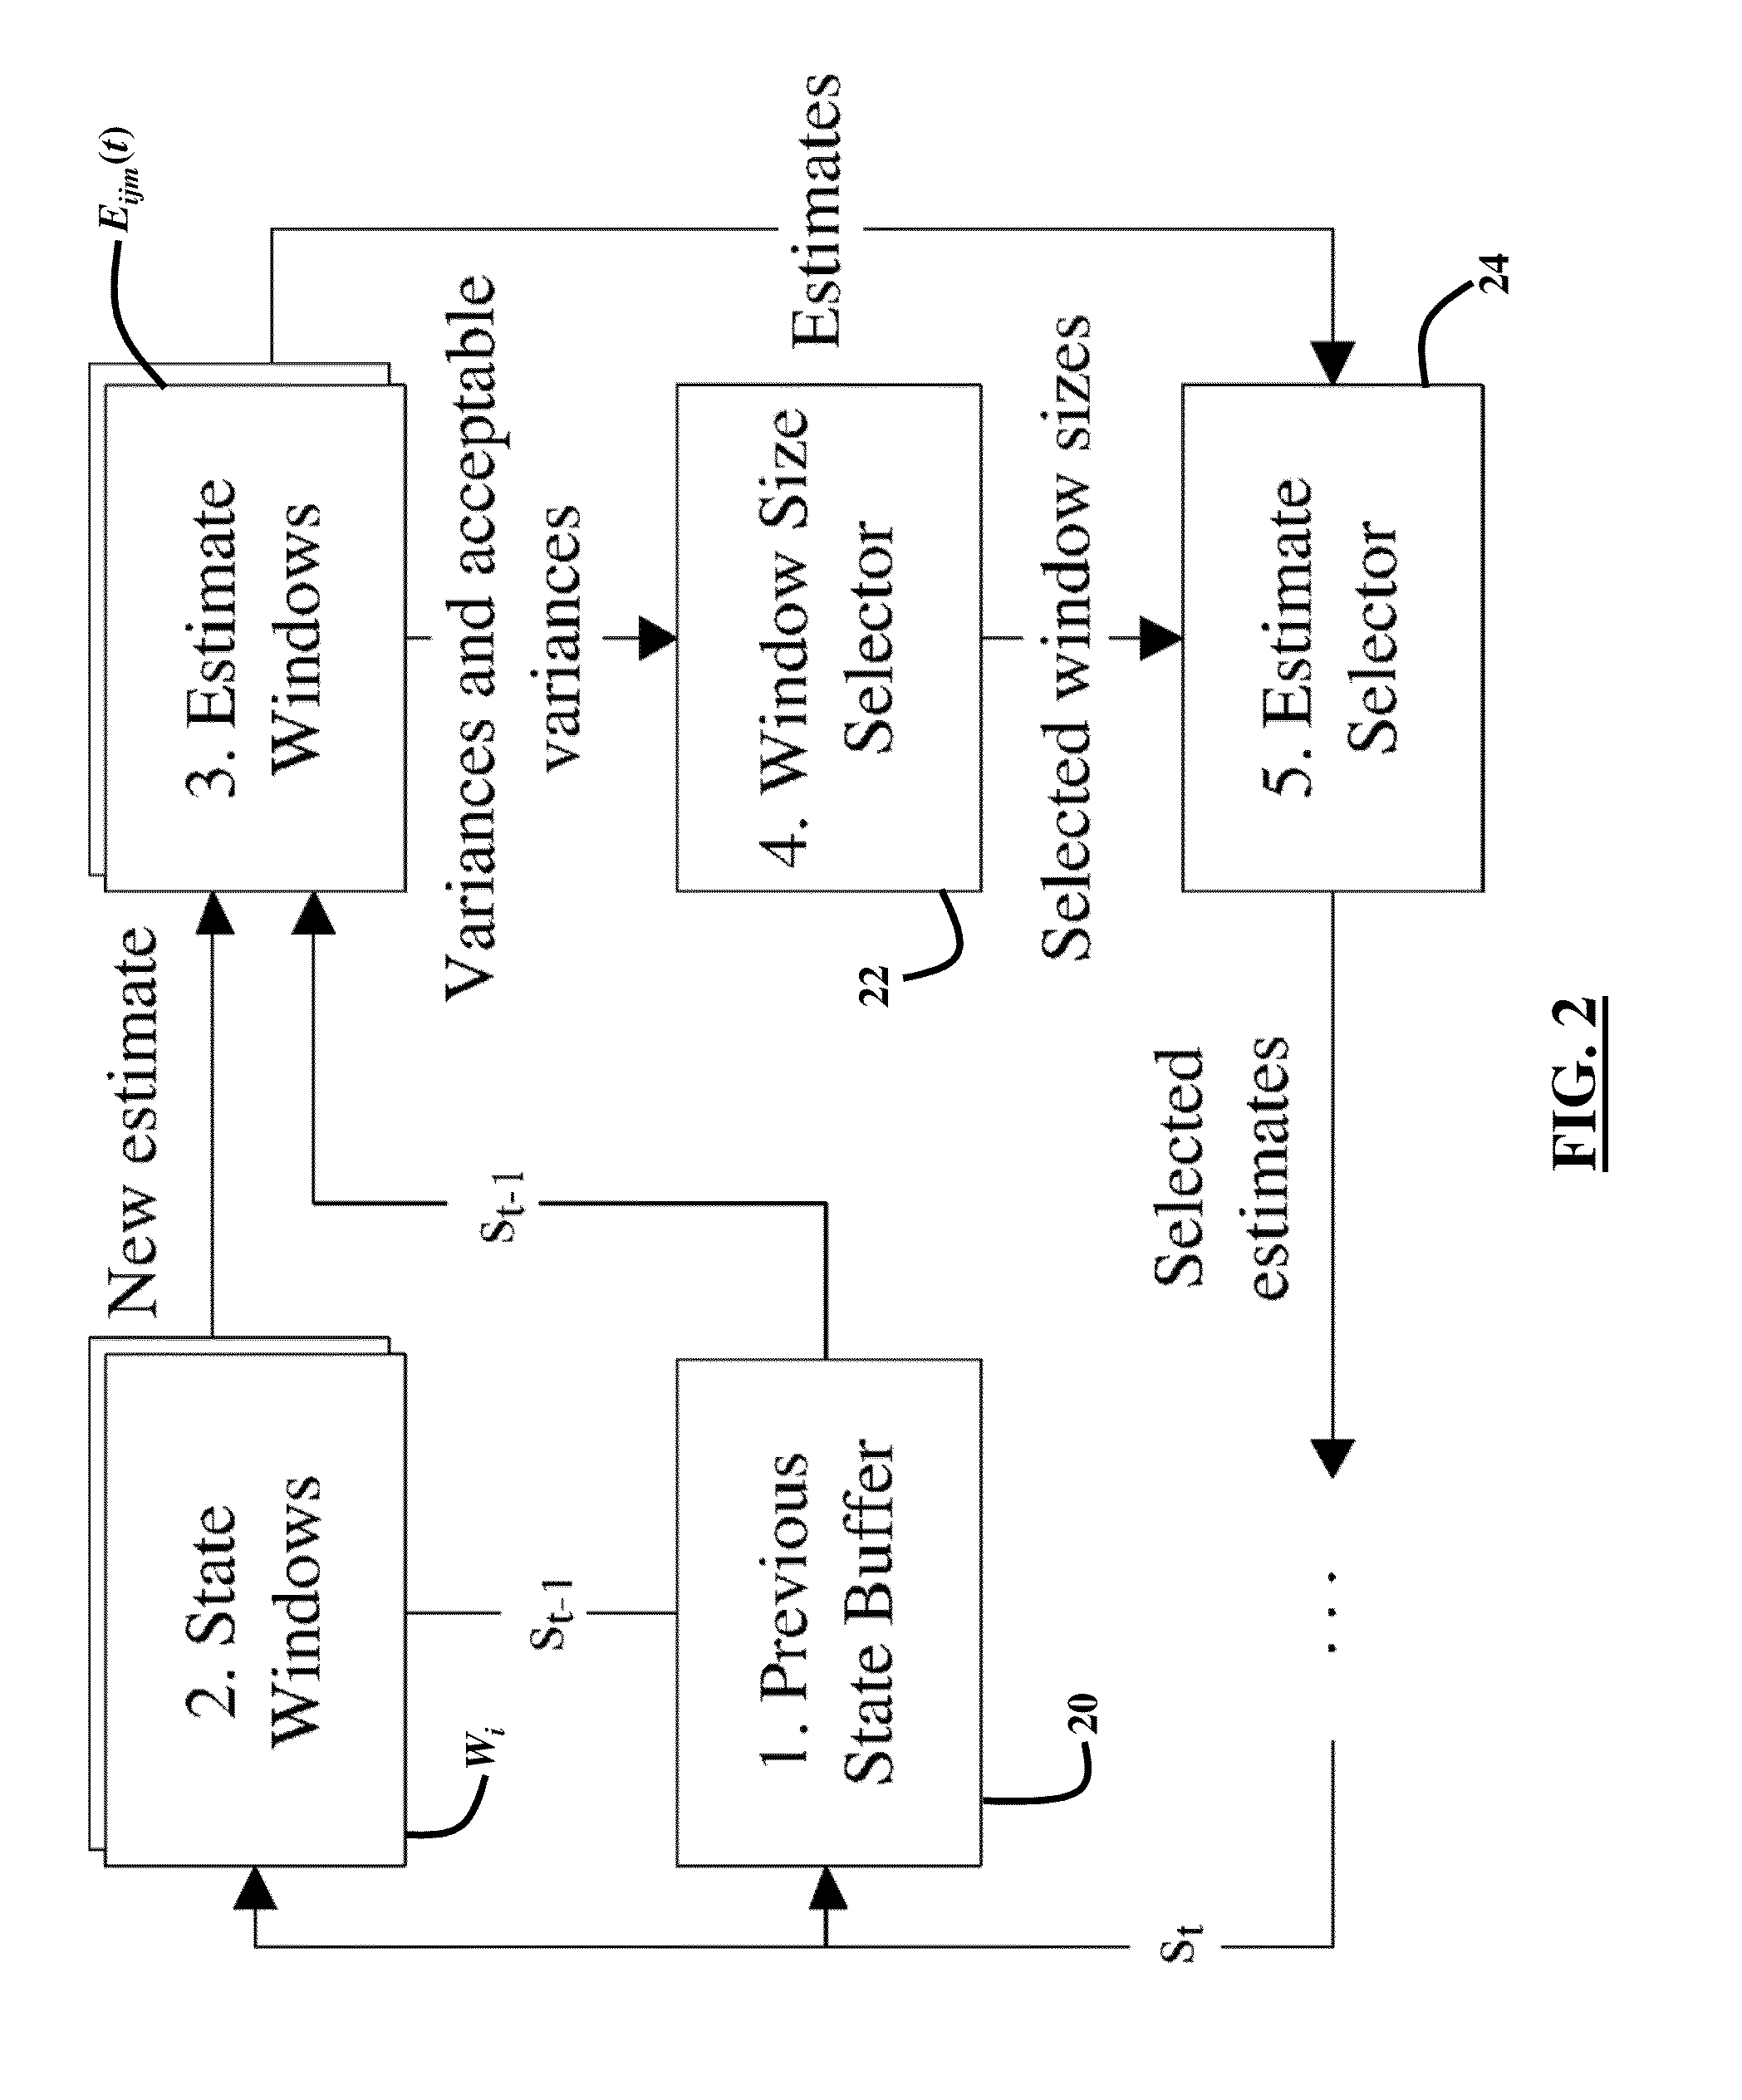 System, Method and Computer Program Product for Energy-Efficient and Service Level Agreement (SLA)-Based Management of Data Centers for Cloud Computing